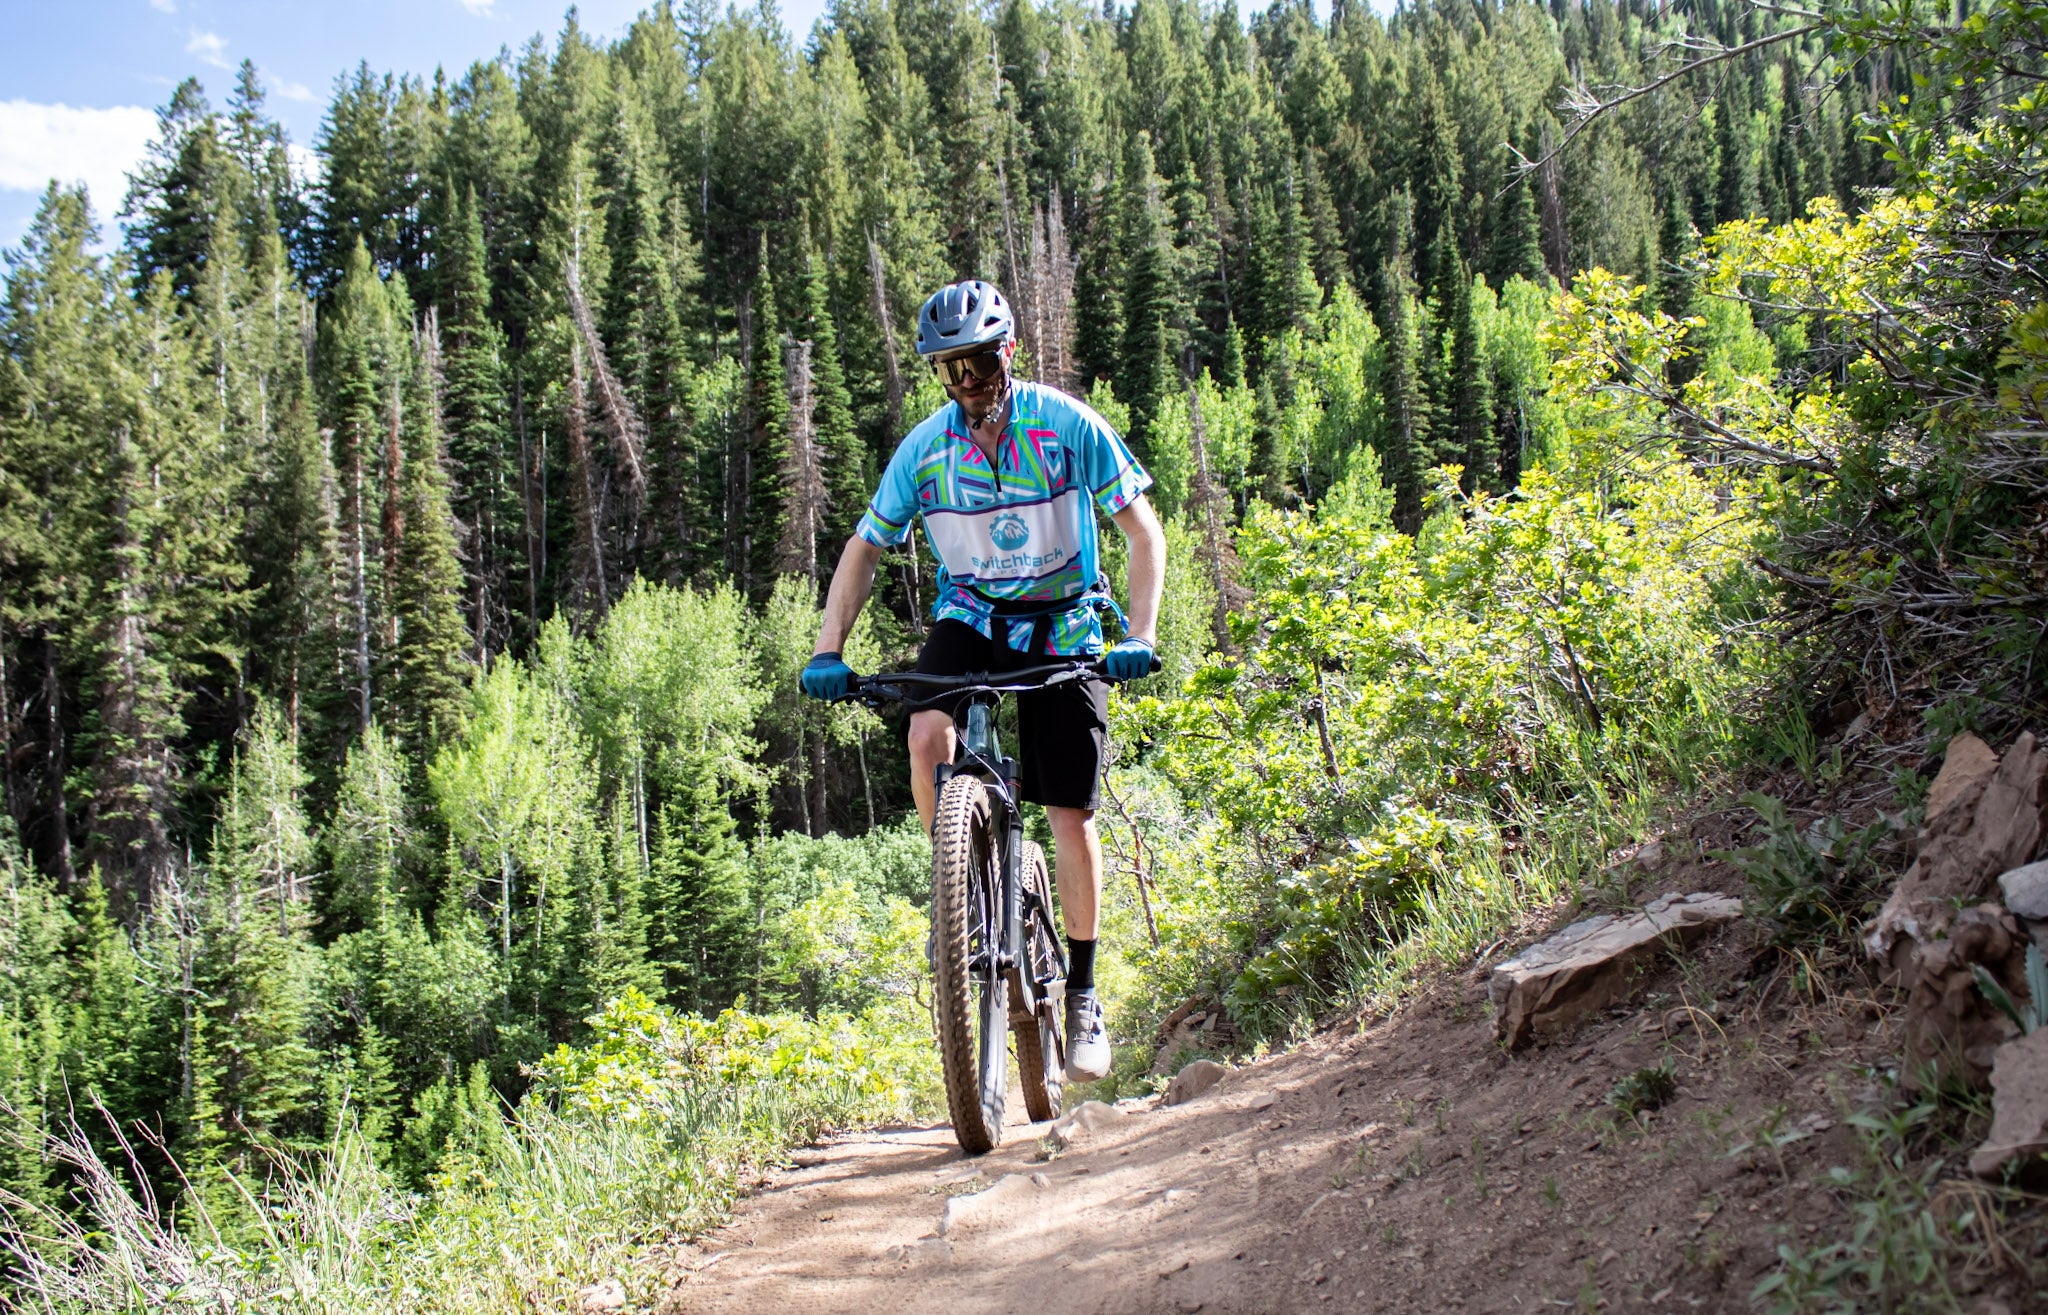 Savor the Summer: 10 Enchanting Activities to Experience in Park City, Utah